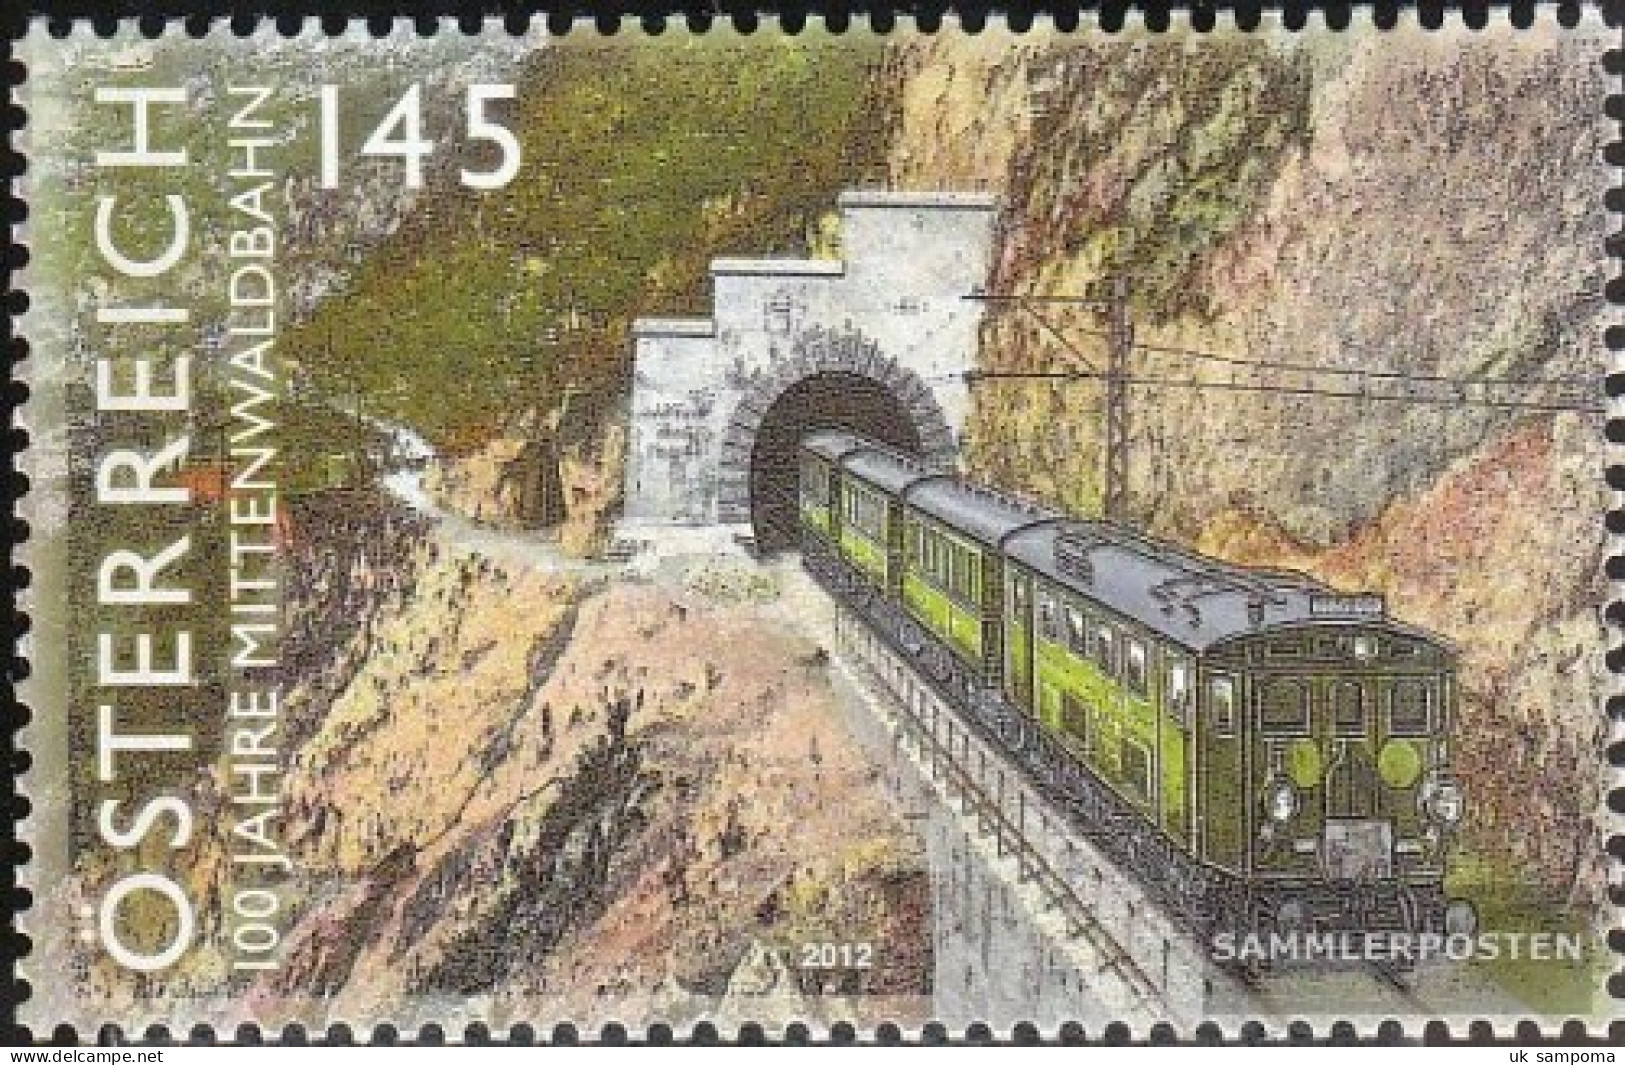 Austria 3020 (complete Issue) Unmounted Mint / Never Hinged 2012 Railway - Unused Stamps